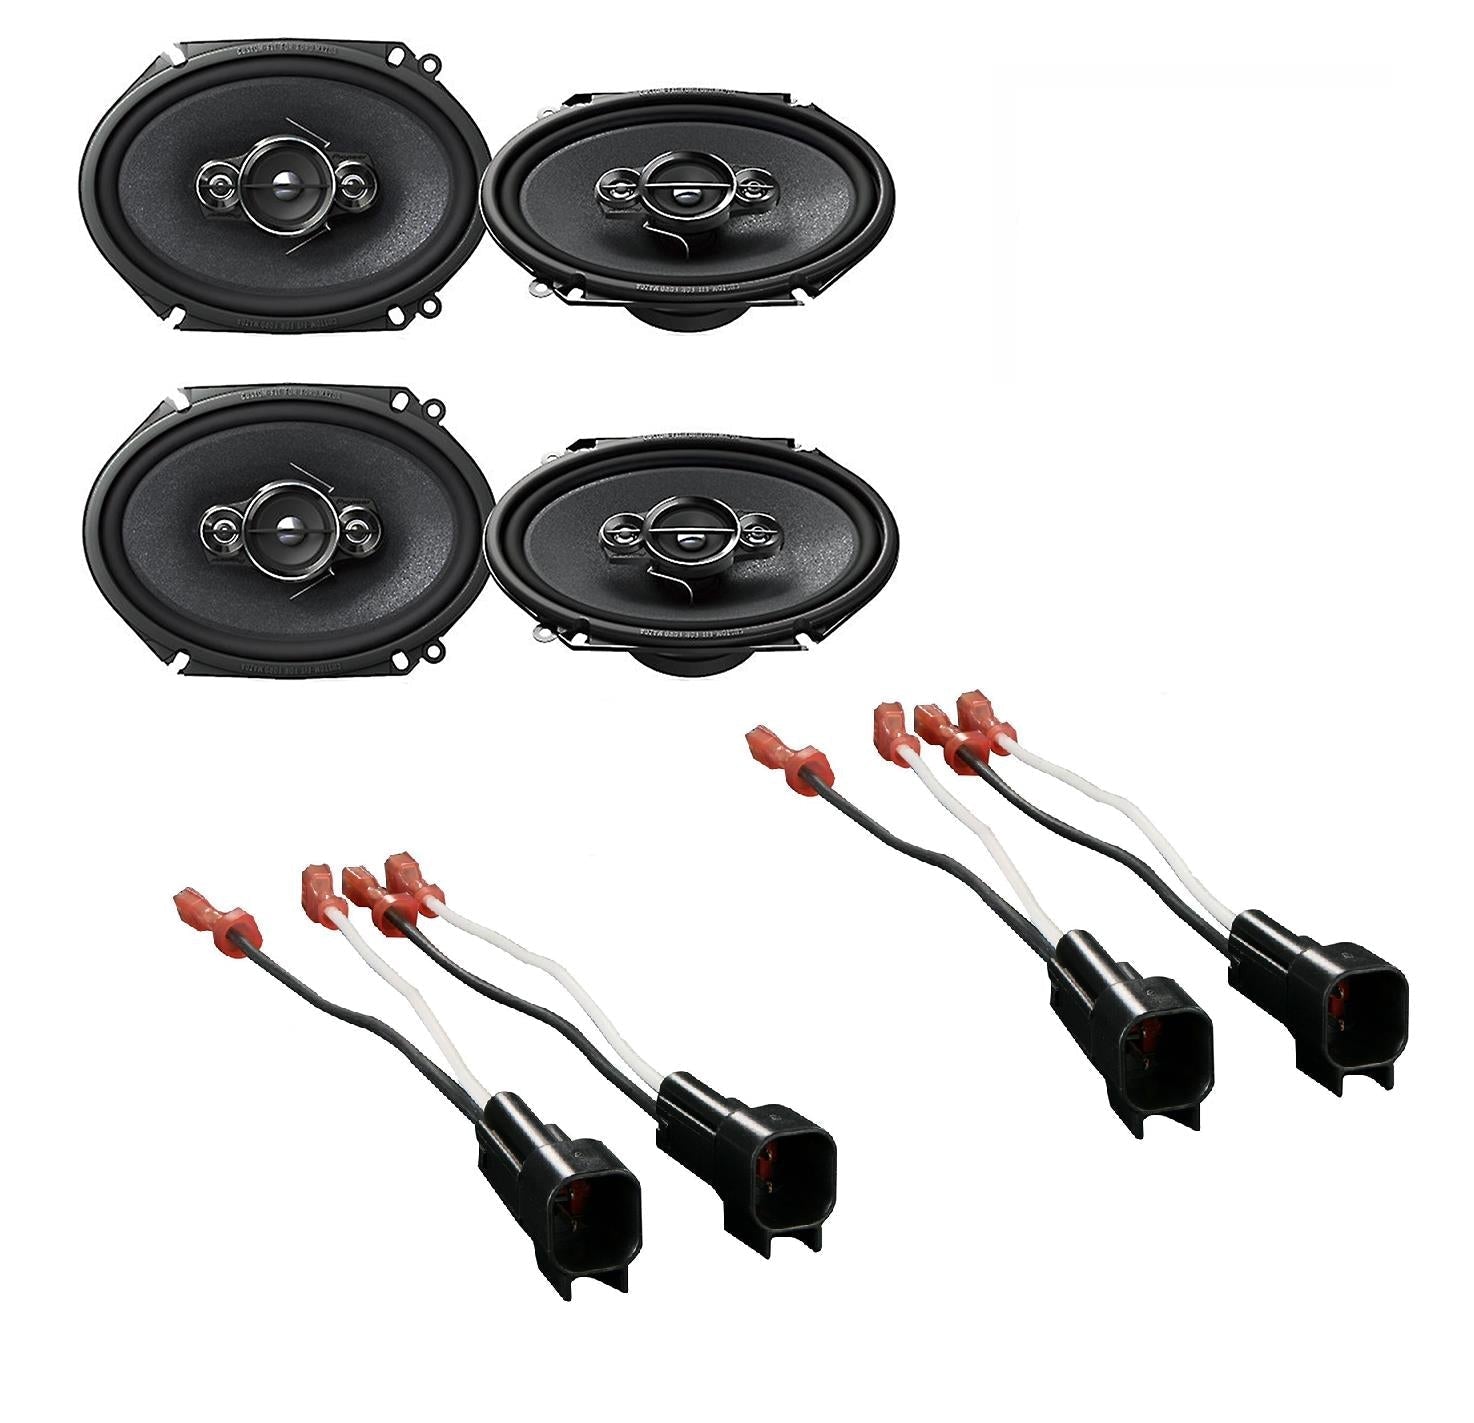 4 Pioneer 6 x 8" 4-Way Speakers + Wire Harness Speaker Connectors for Ford